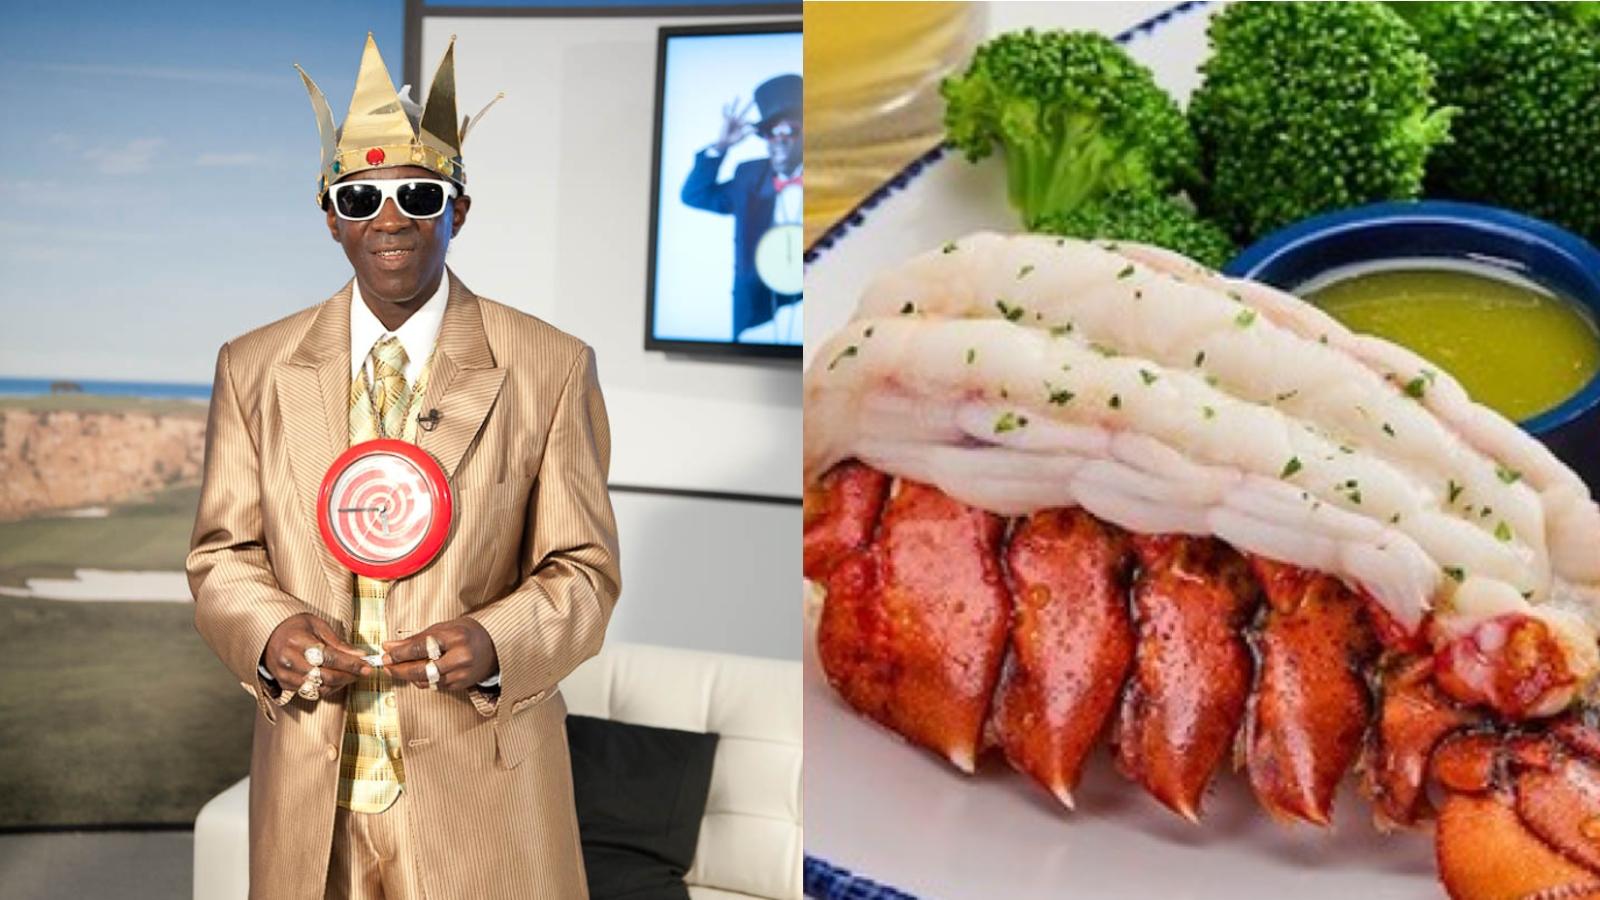 Flavor Flave tries to save Red Lobster